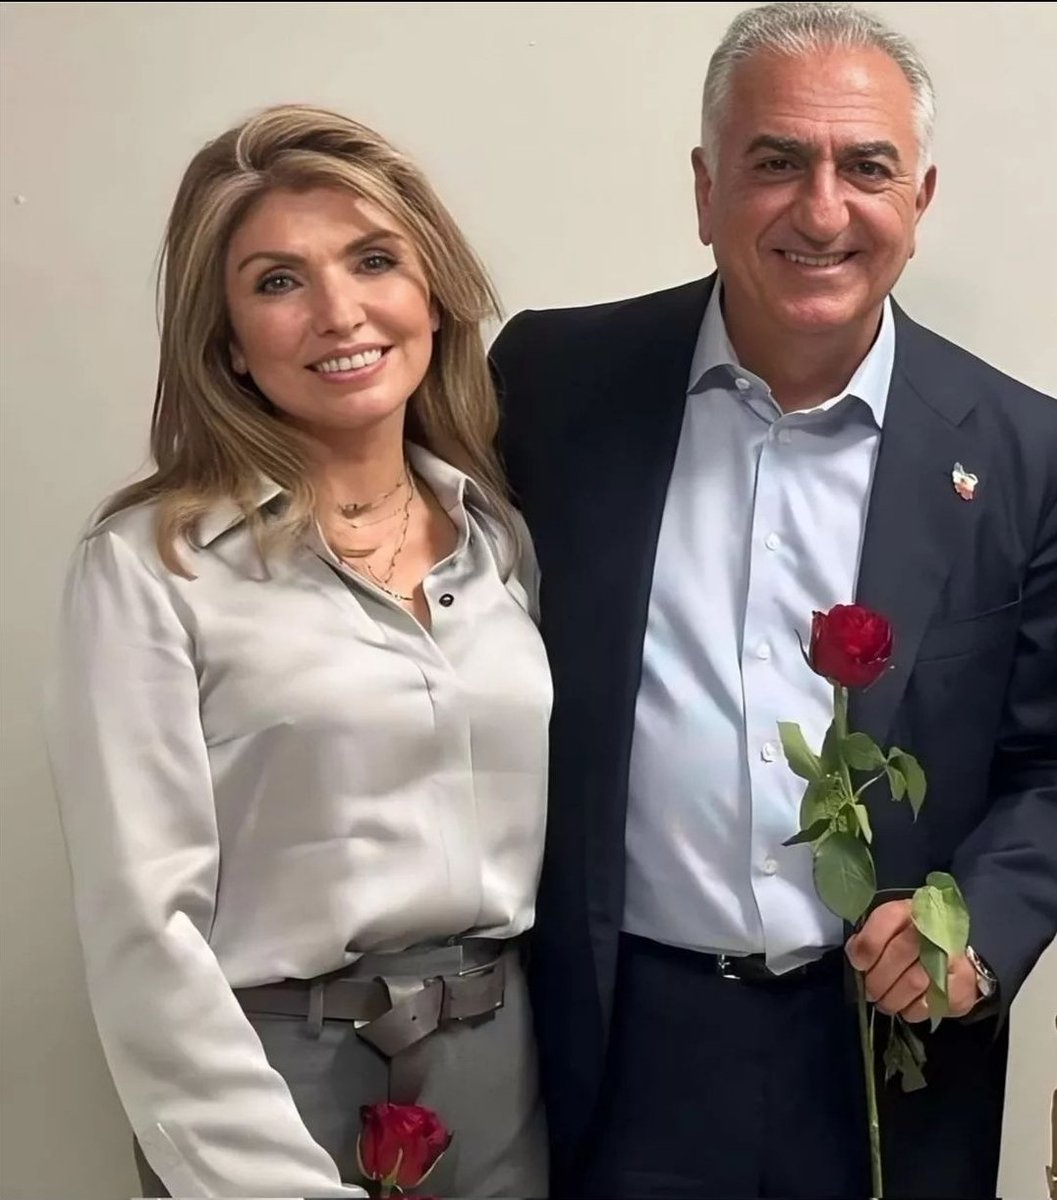 @JTLonsdale @PahlaviReza We appreciate all our #king efforts for Iranians & Iran. Long live the #King Long live the #Queen Long live #Iran #KingRezaPahlavi